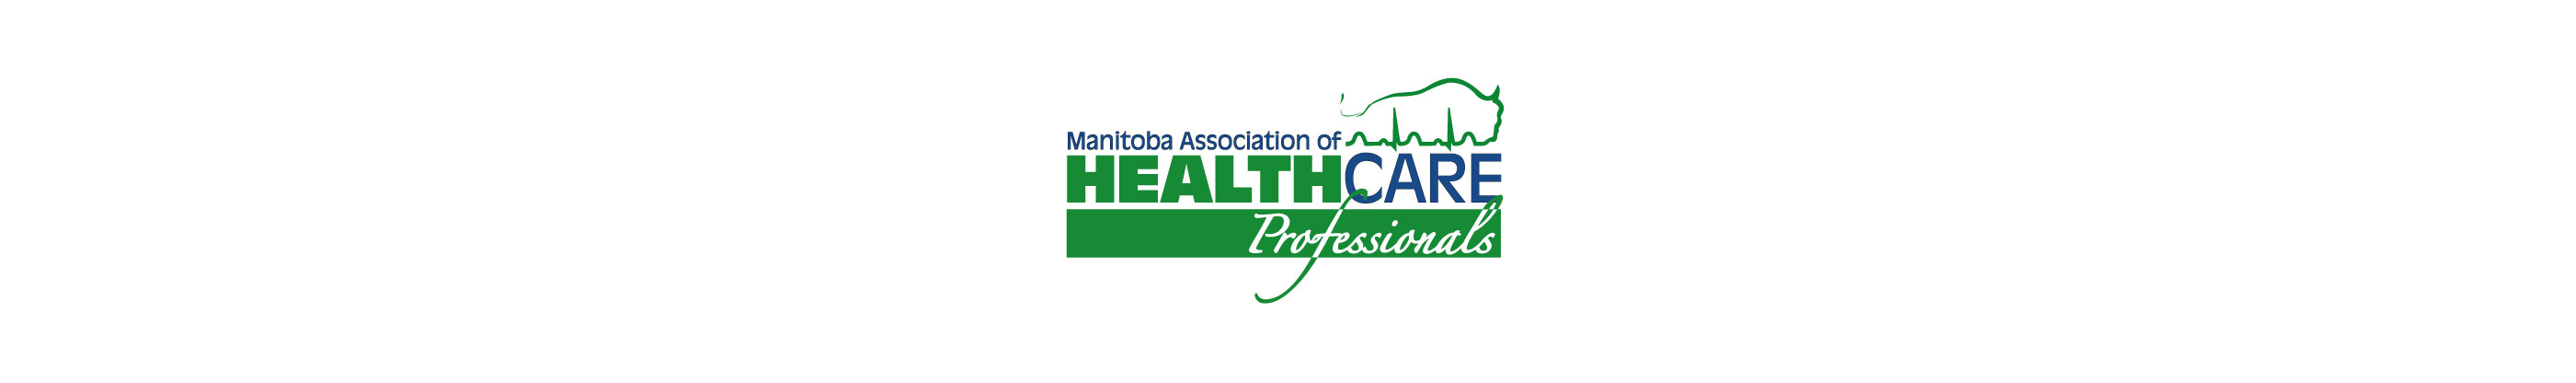 Open Letter to Premier Pallister – Urgent Support Needed for Health Care Professionals